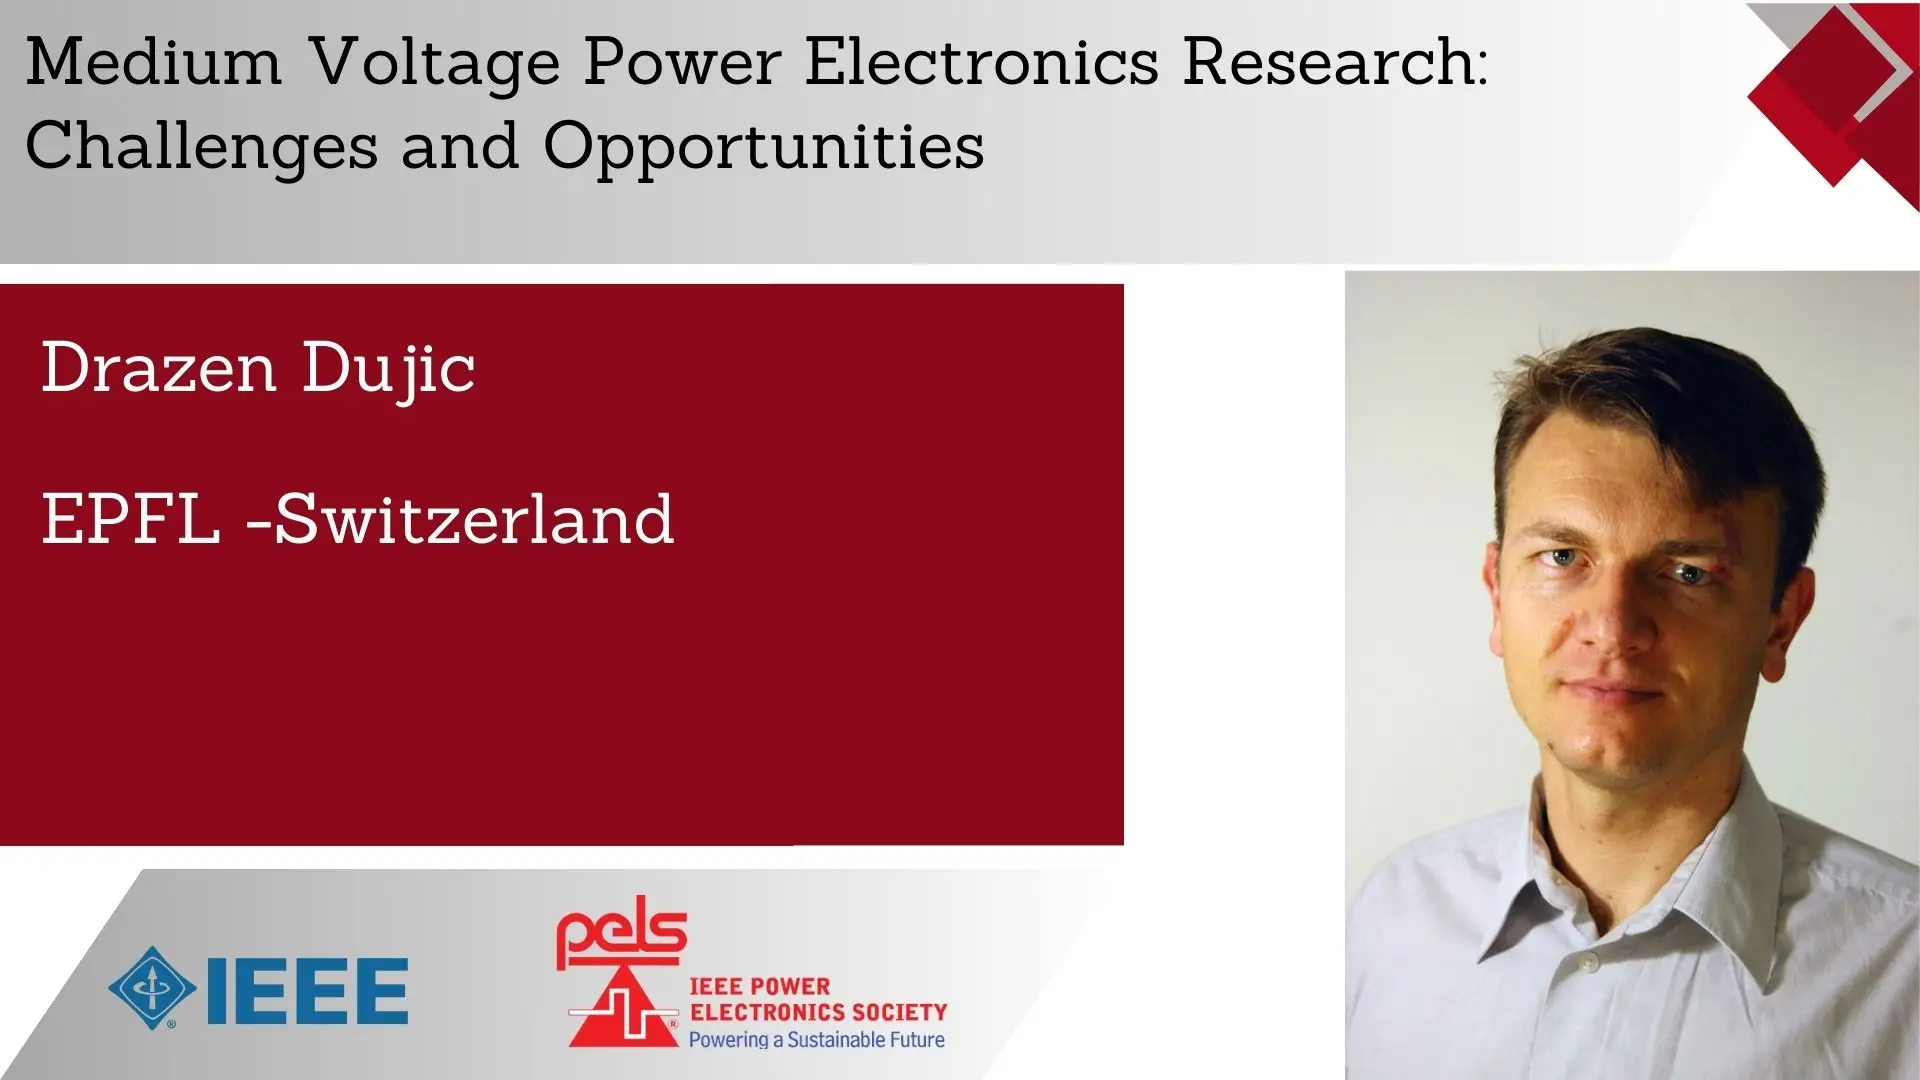 Medium Voltage Power Electronics Research: Challenges and Opportunities-Video